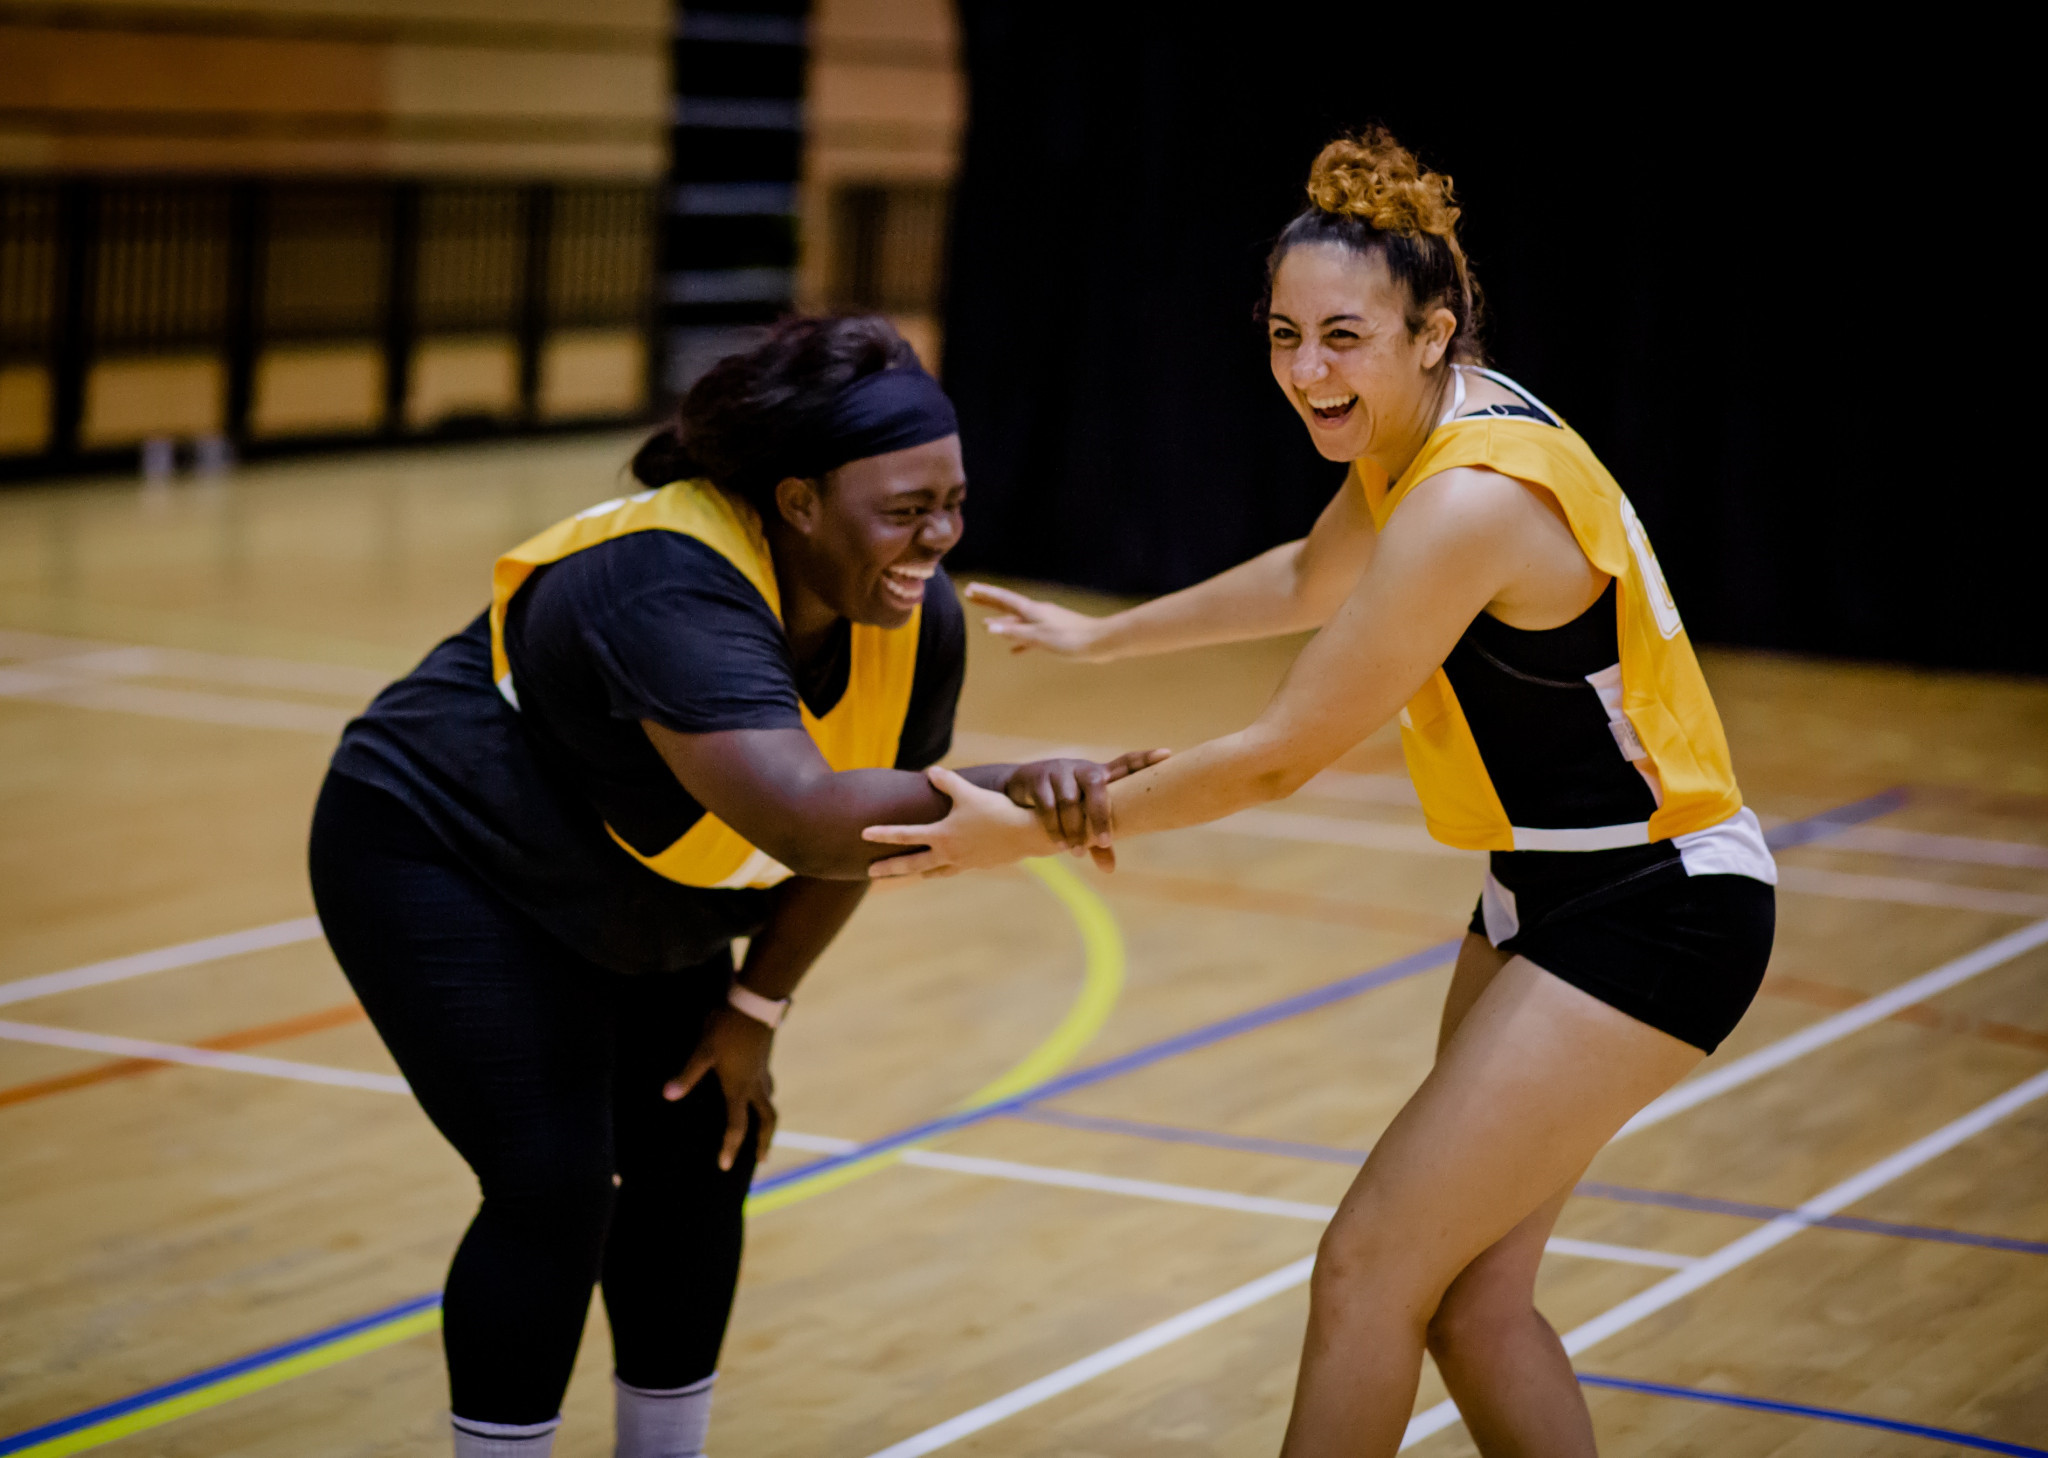 England Netball has introduced the Couch To Court concept to help battle inactivity among women ©England Netball